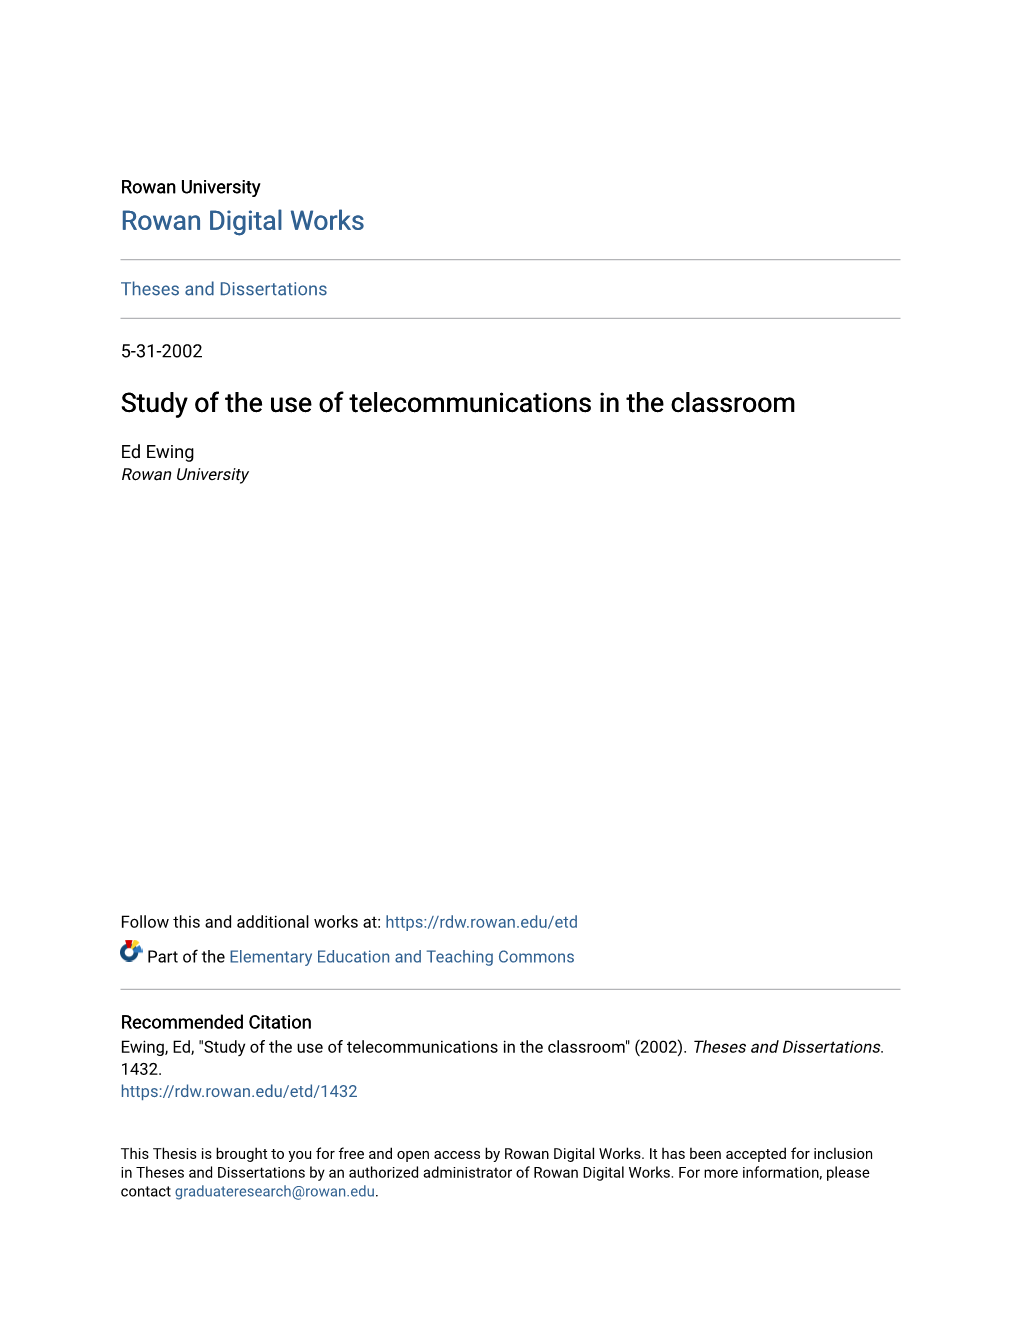 Study of the Use of Telecommunications in the Classroom